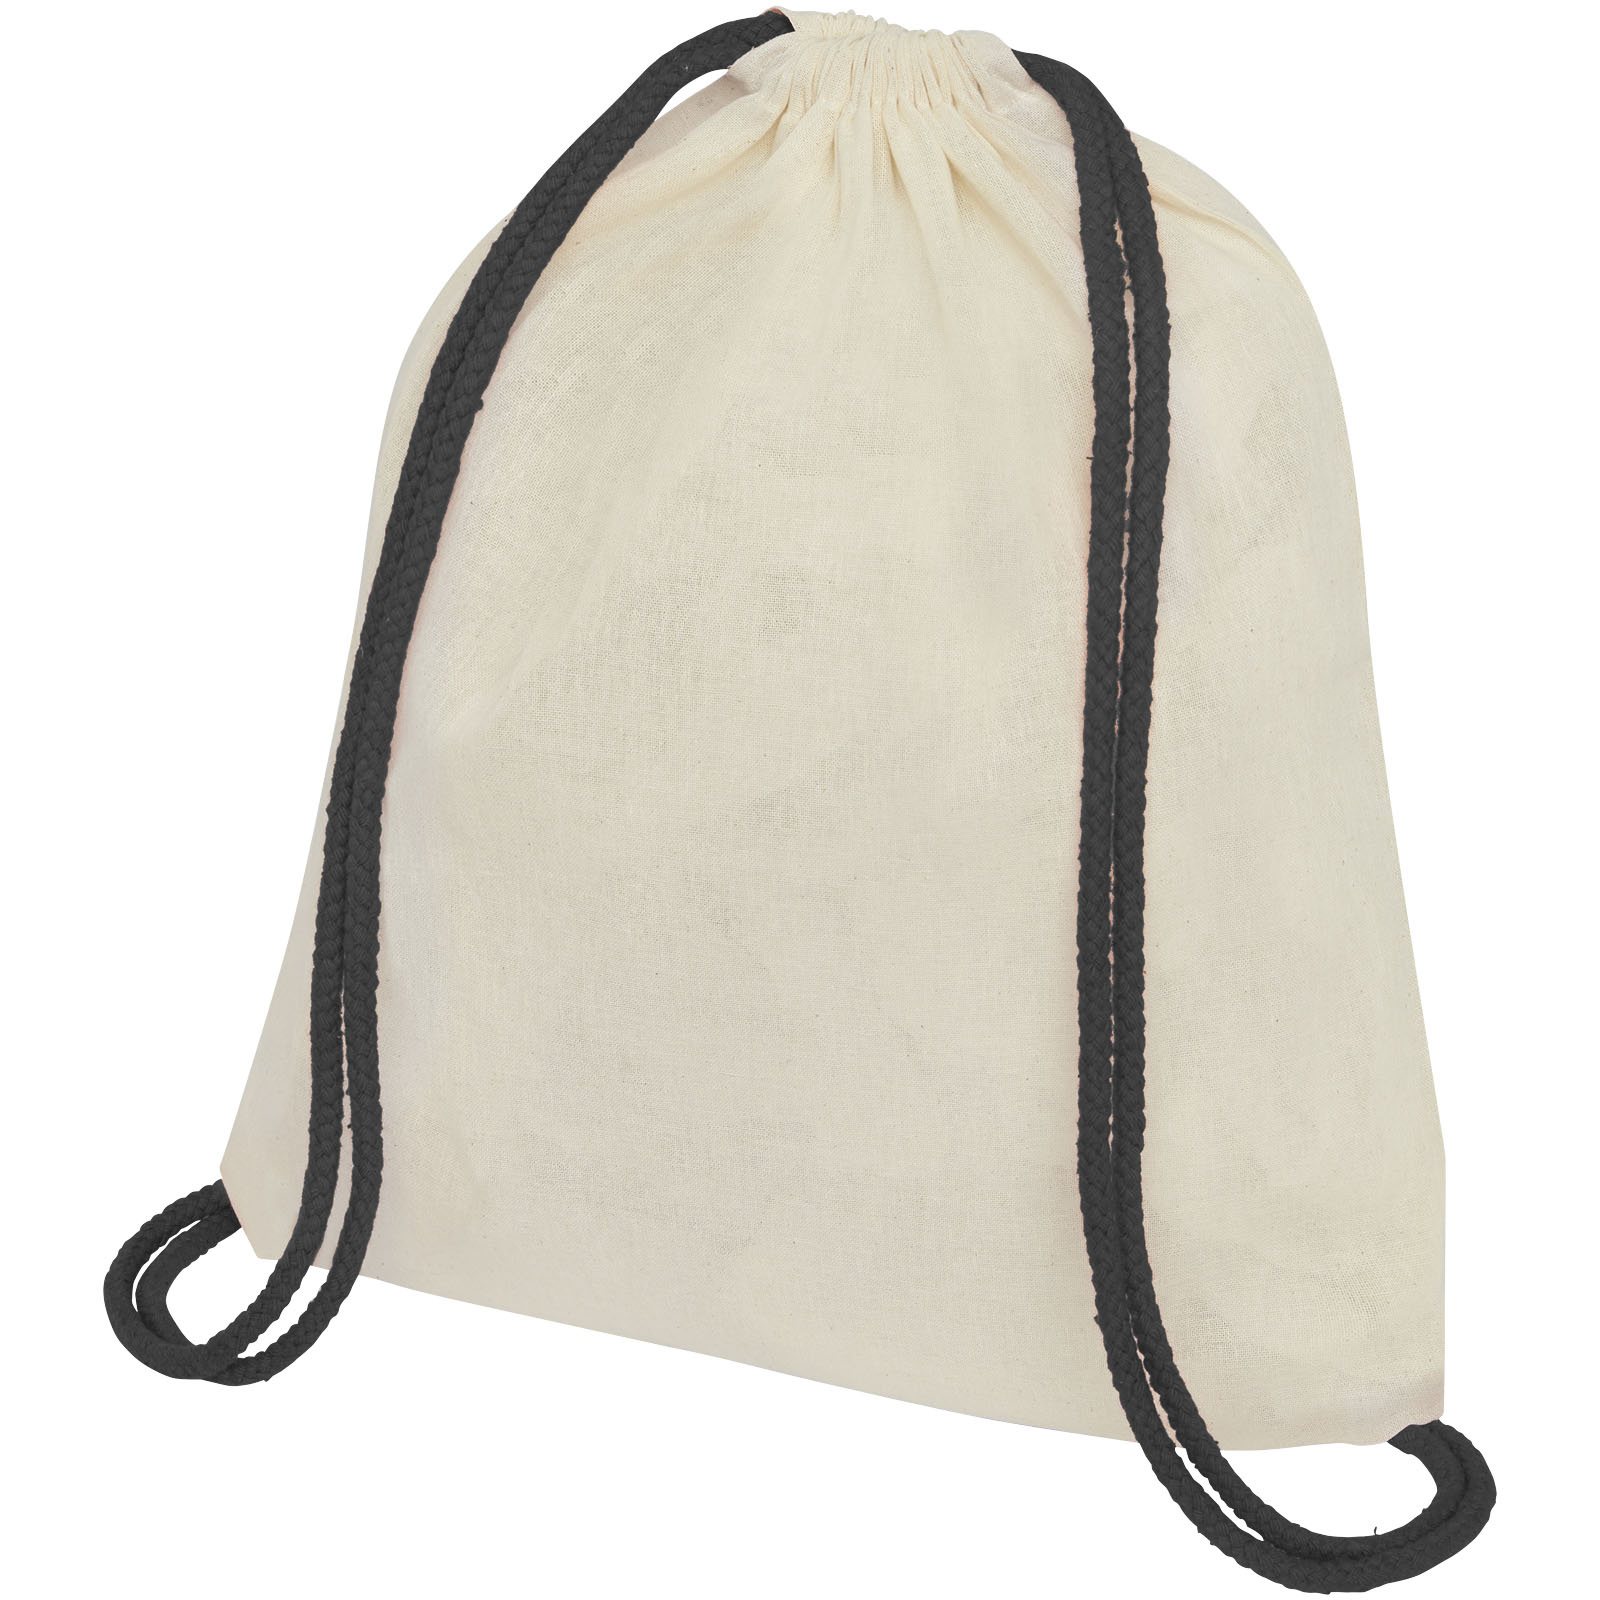 Advertising Drawstring Bags - Oregon 100 g/m² cotton drawstring bag with coloured cords 5L